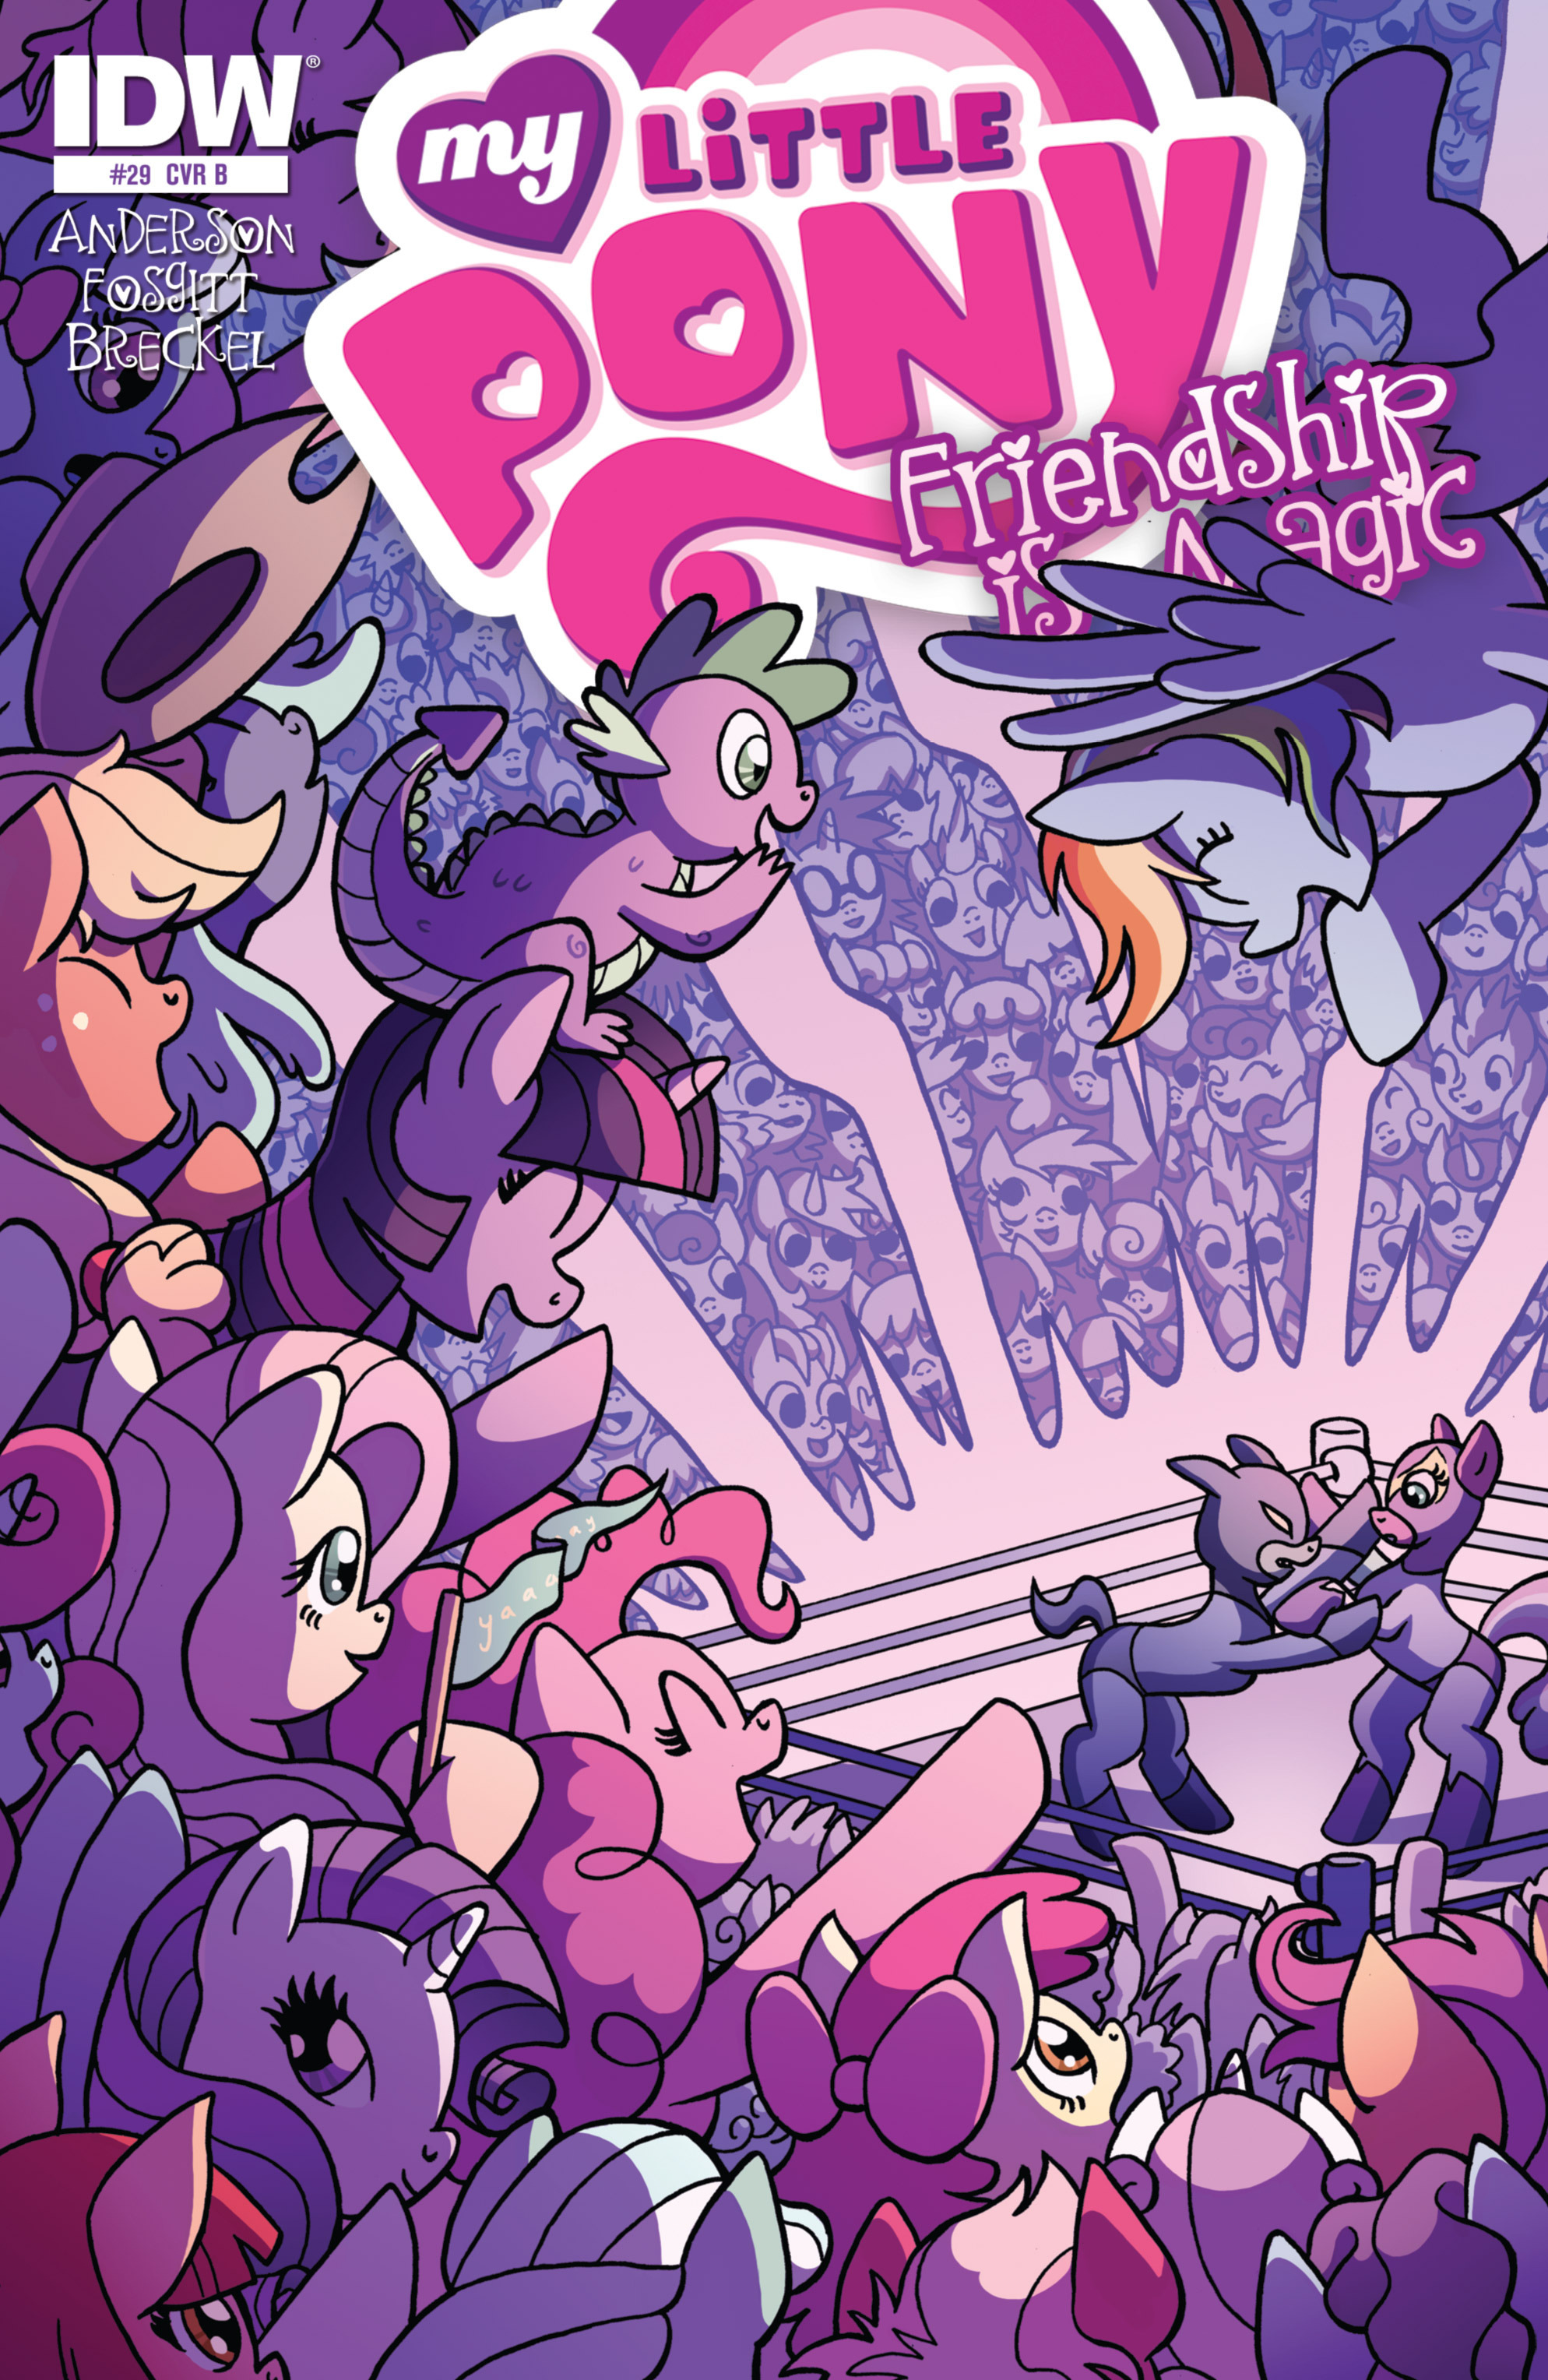 Read online My Little Pony: Friendship is Magic comic -  Issue #29 - 2